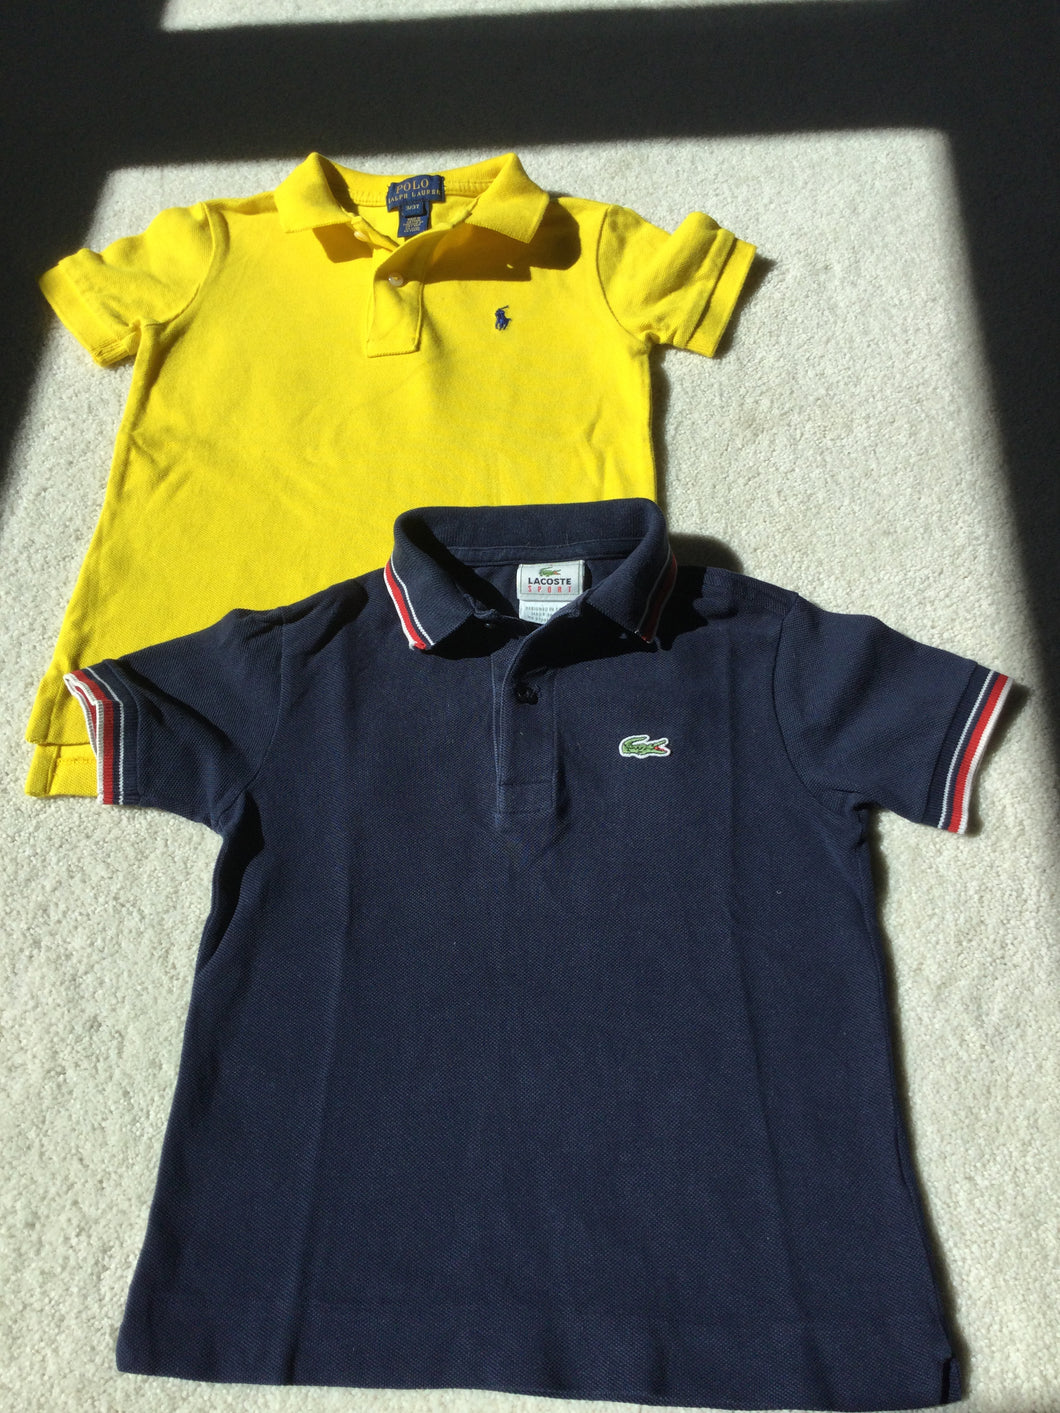 Ralph Lauren Polo and Izod Lacoste shirts 3T 3T